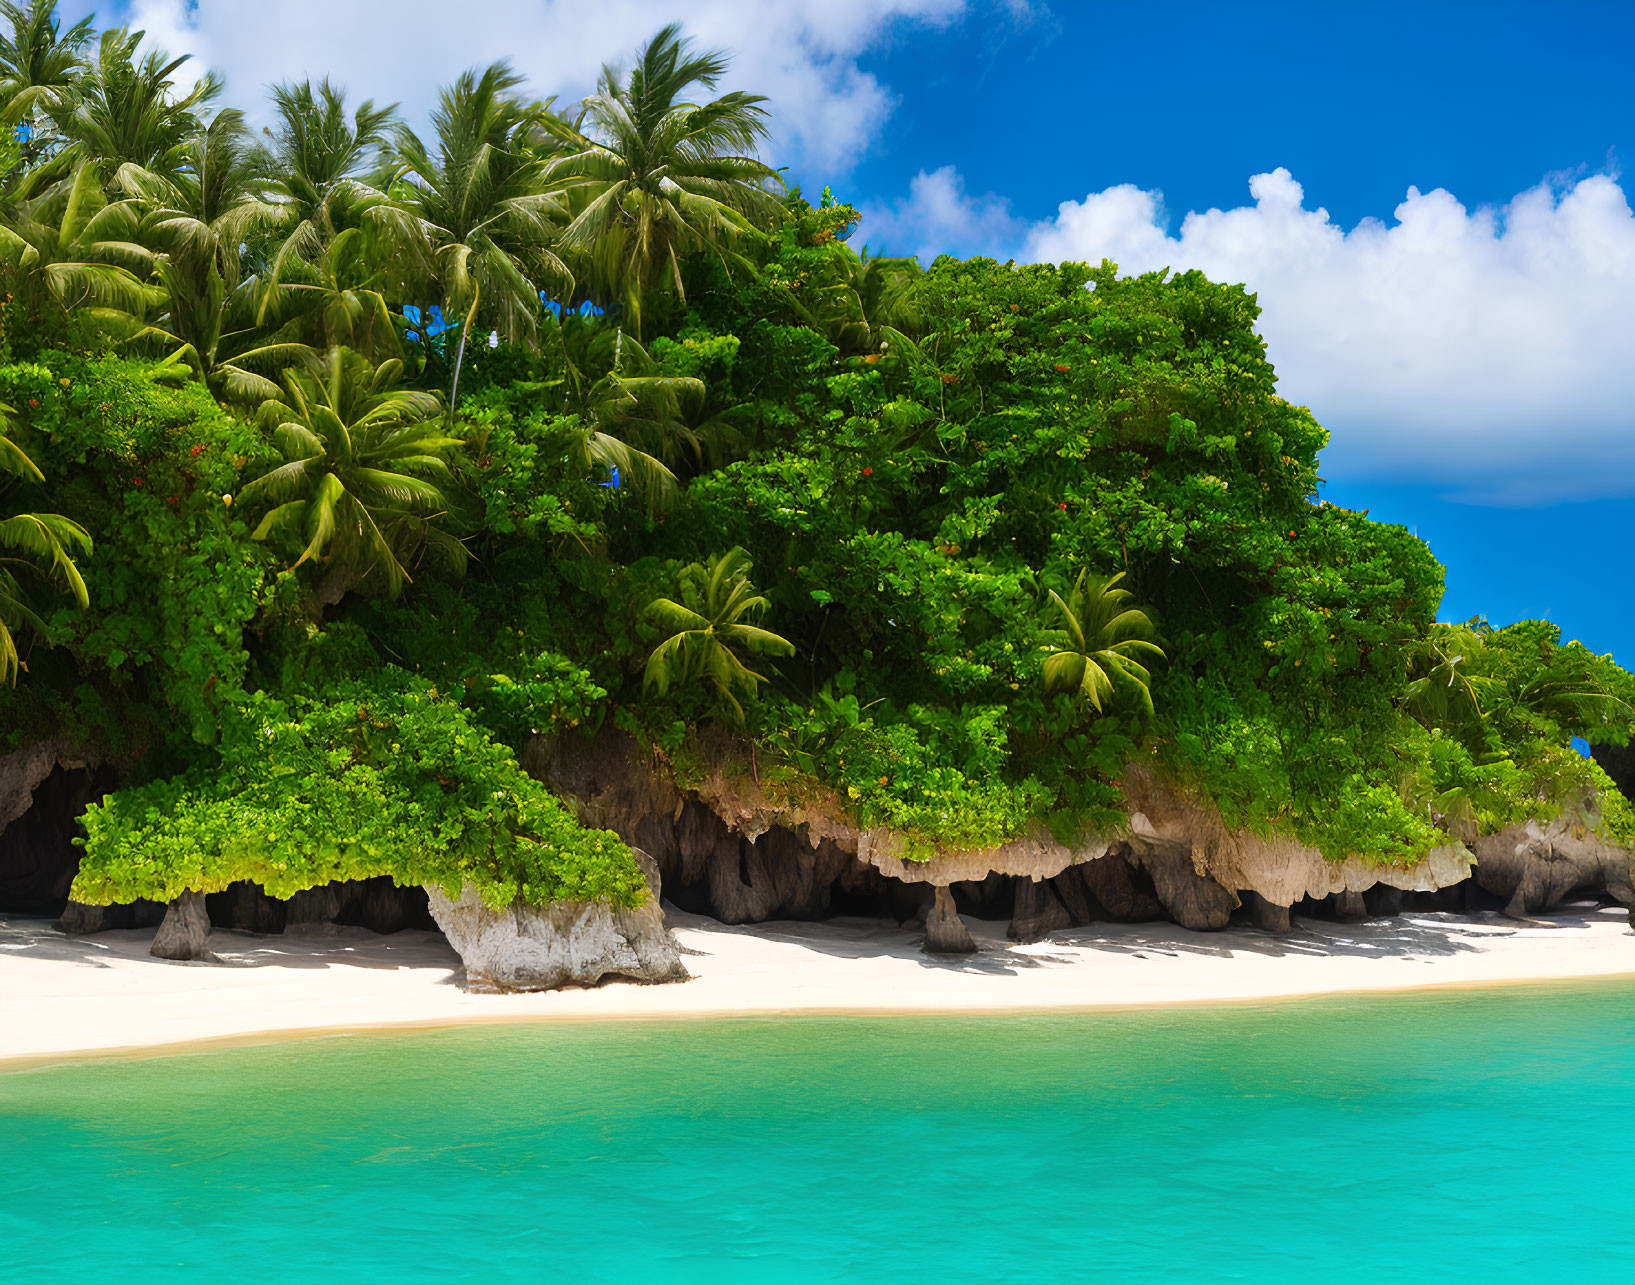 Scenic tropical beach with palm trees, blue sky, and rock formations